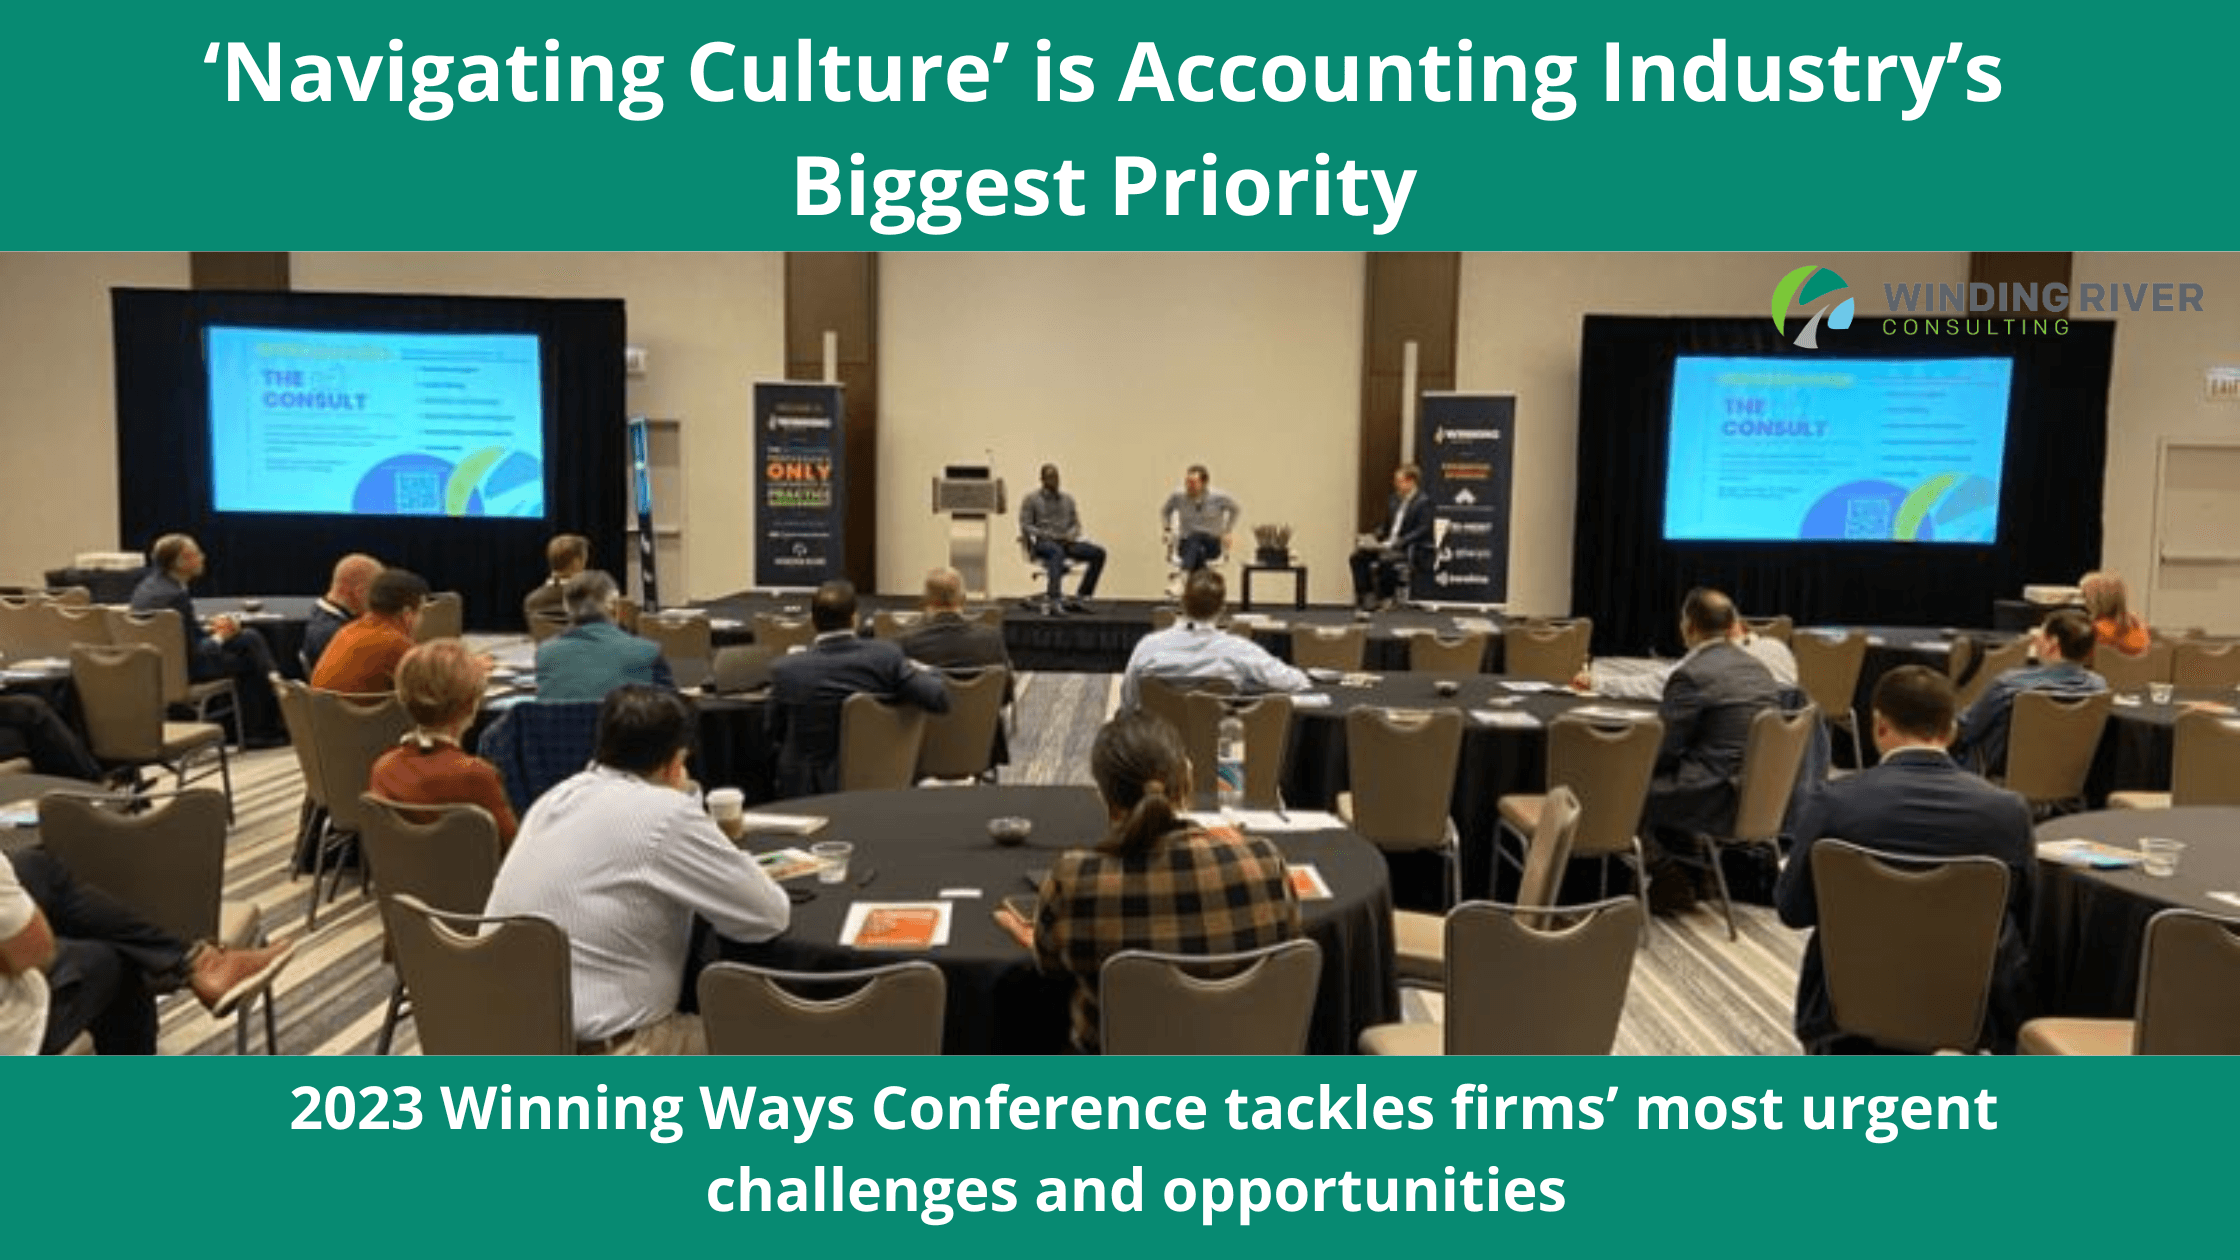 ‘Navigating Culture’ is Accounting Industry’s Biggest Priority